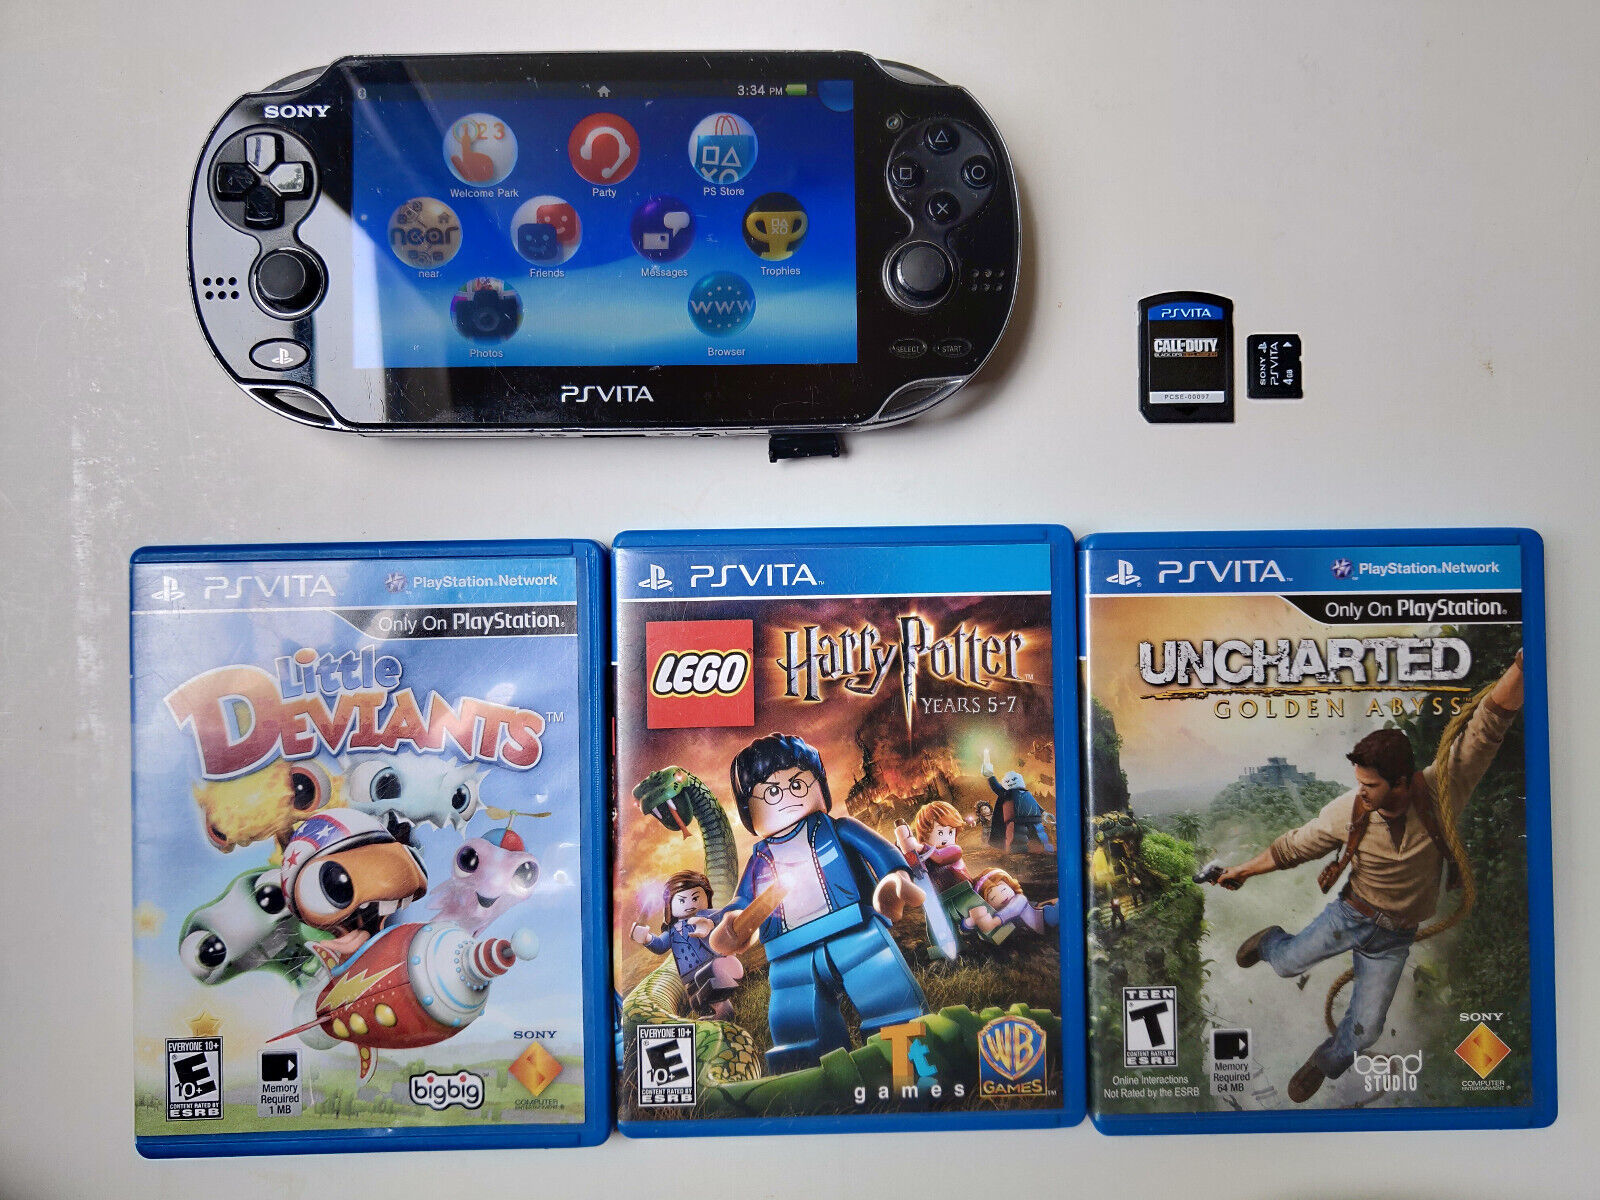 Primary image for Sony PS Vita PCH-1001 Handheld Console w/ 4 Games COD Uncharted  Firmware 3.73